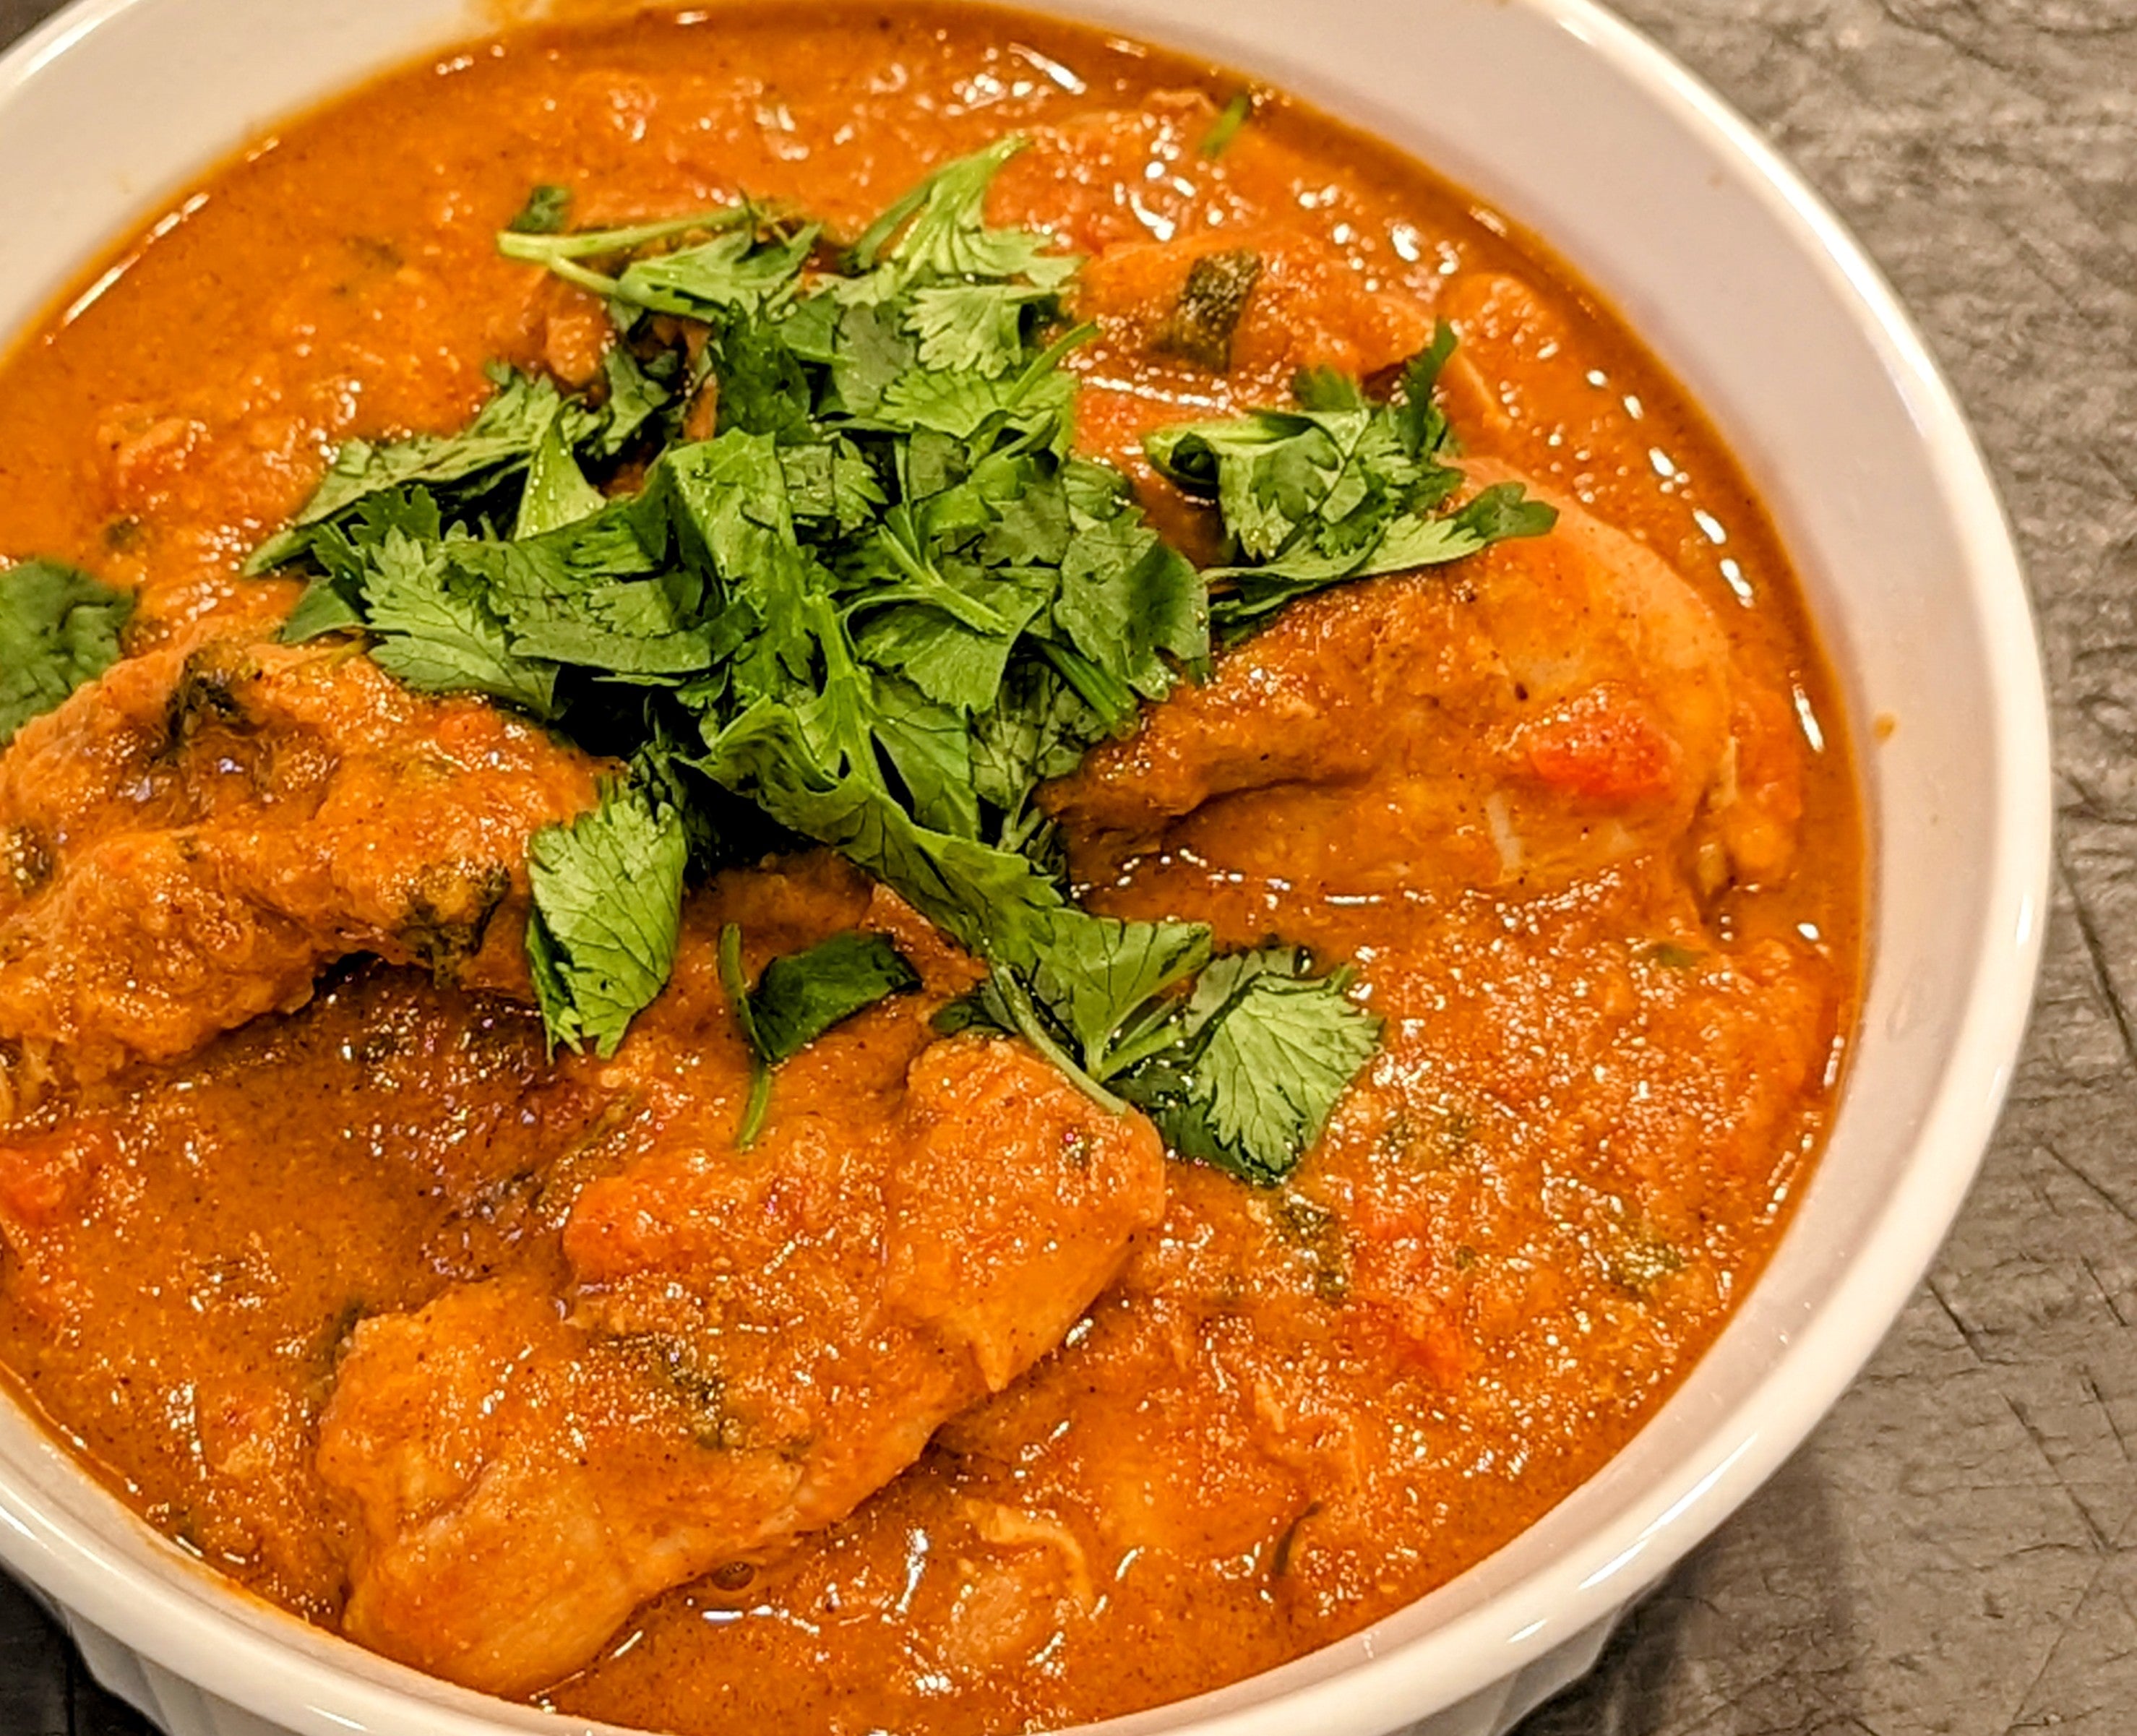 chicken curry, curry, chicken, spice, savory, warm, delicious meal